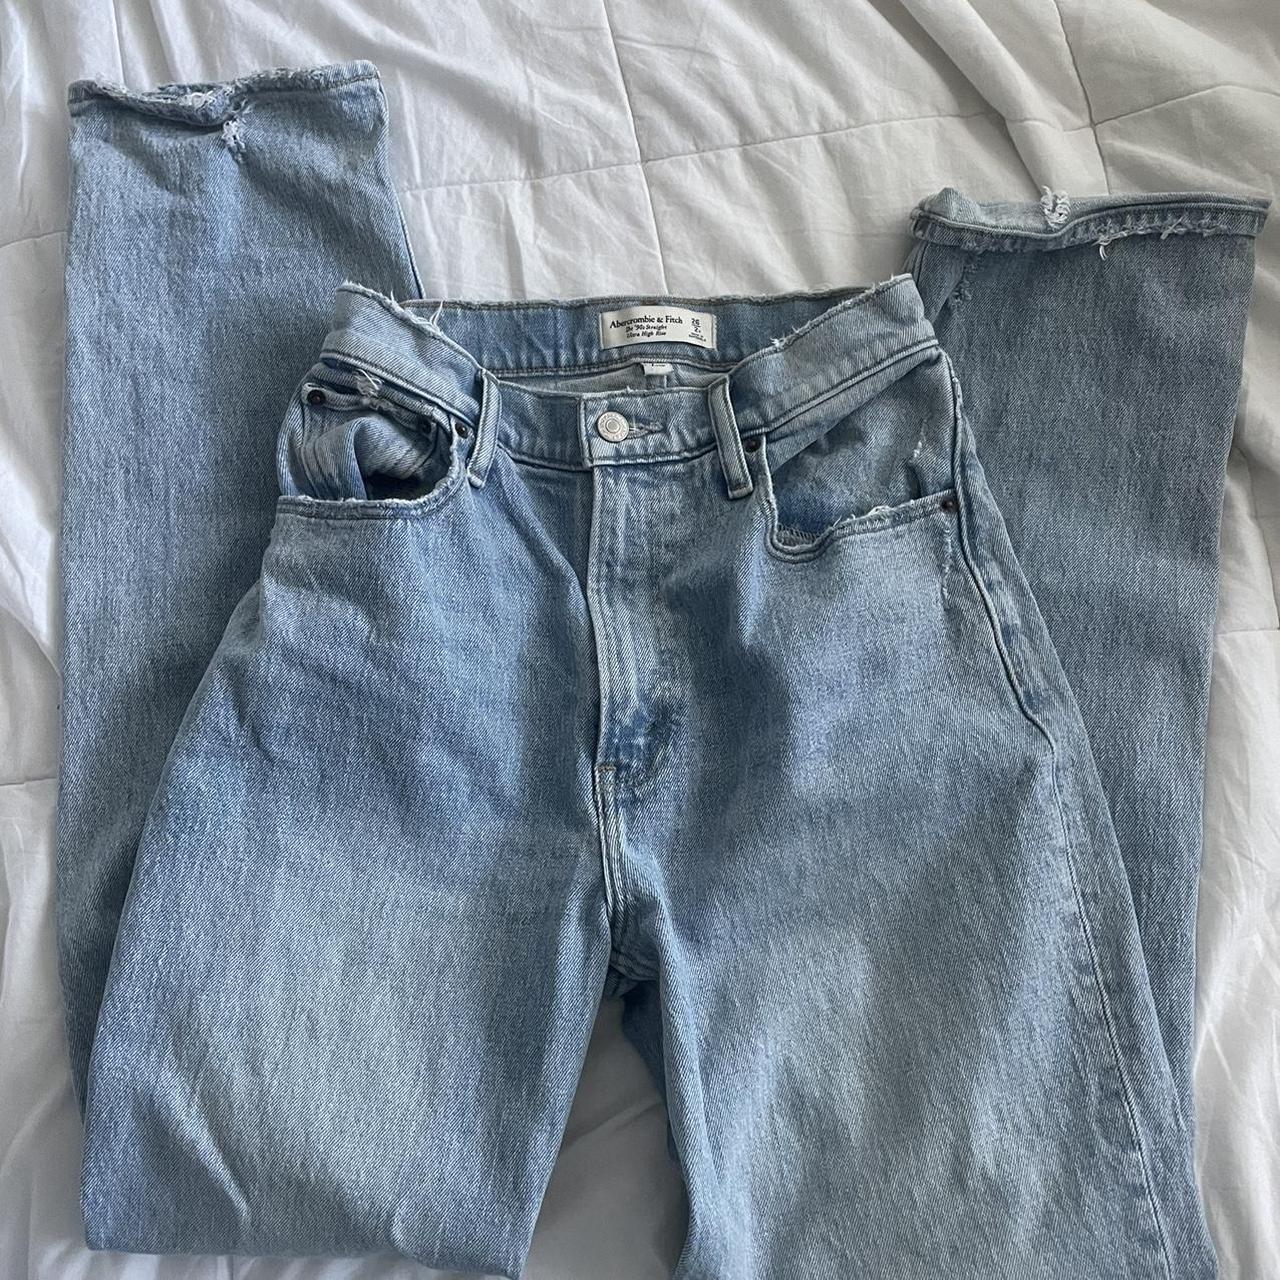 Abercrombie and Fitch 90s Ultra High Rise Jeans in... - Depop